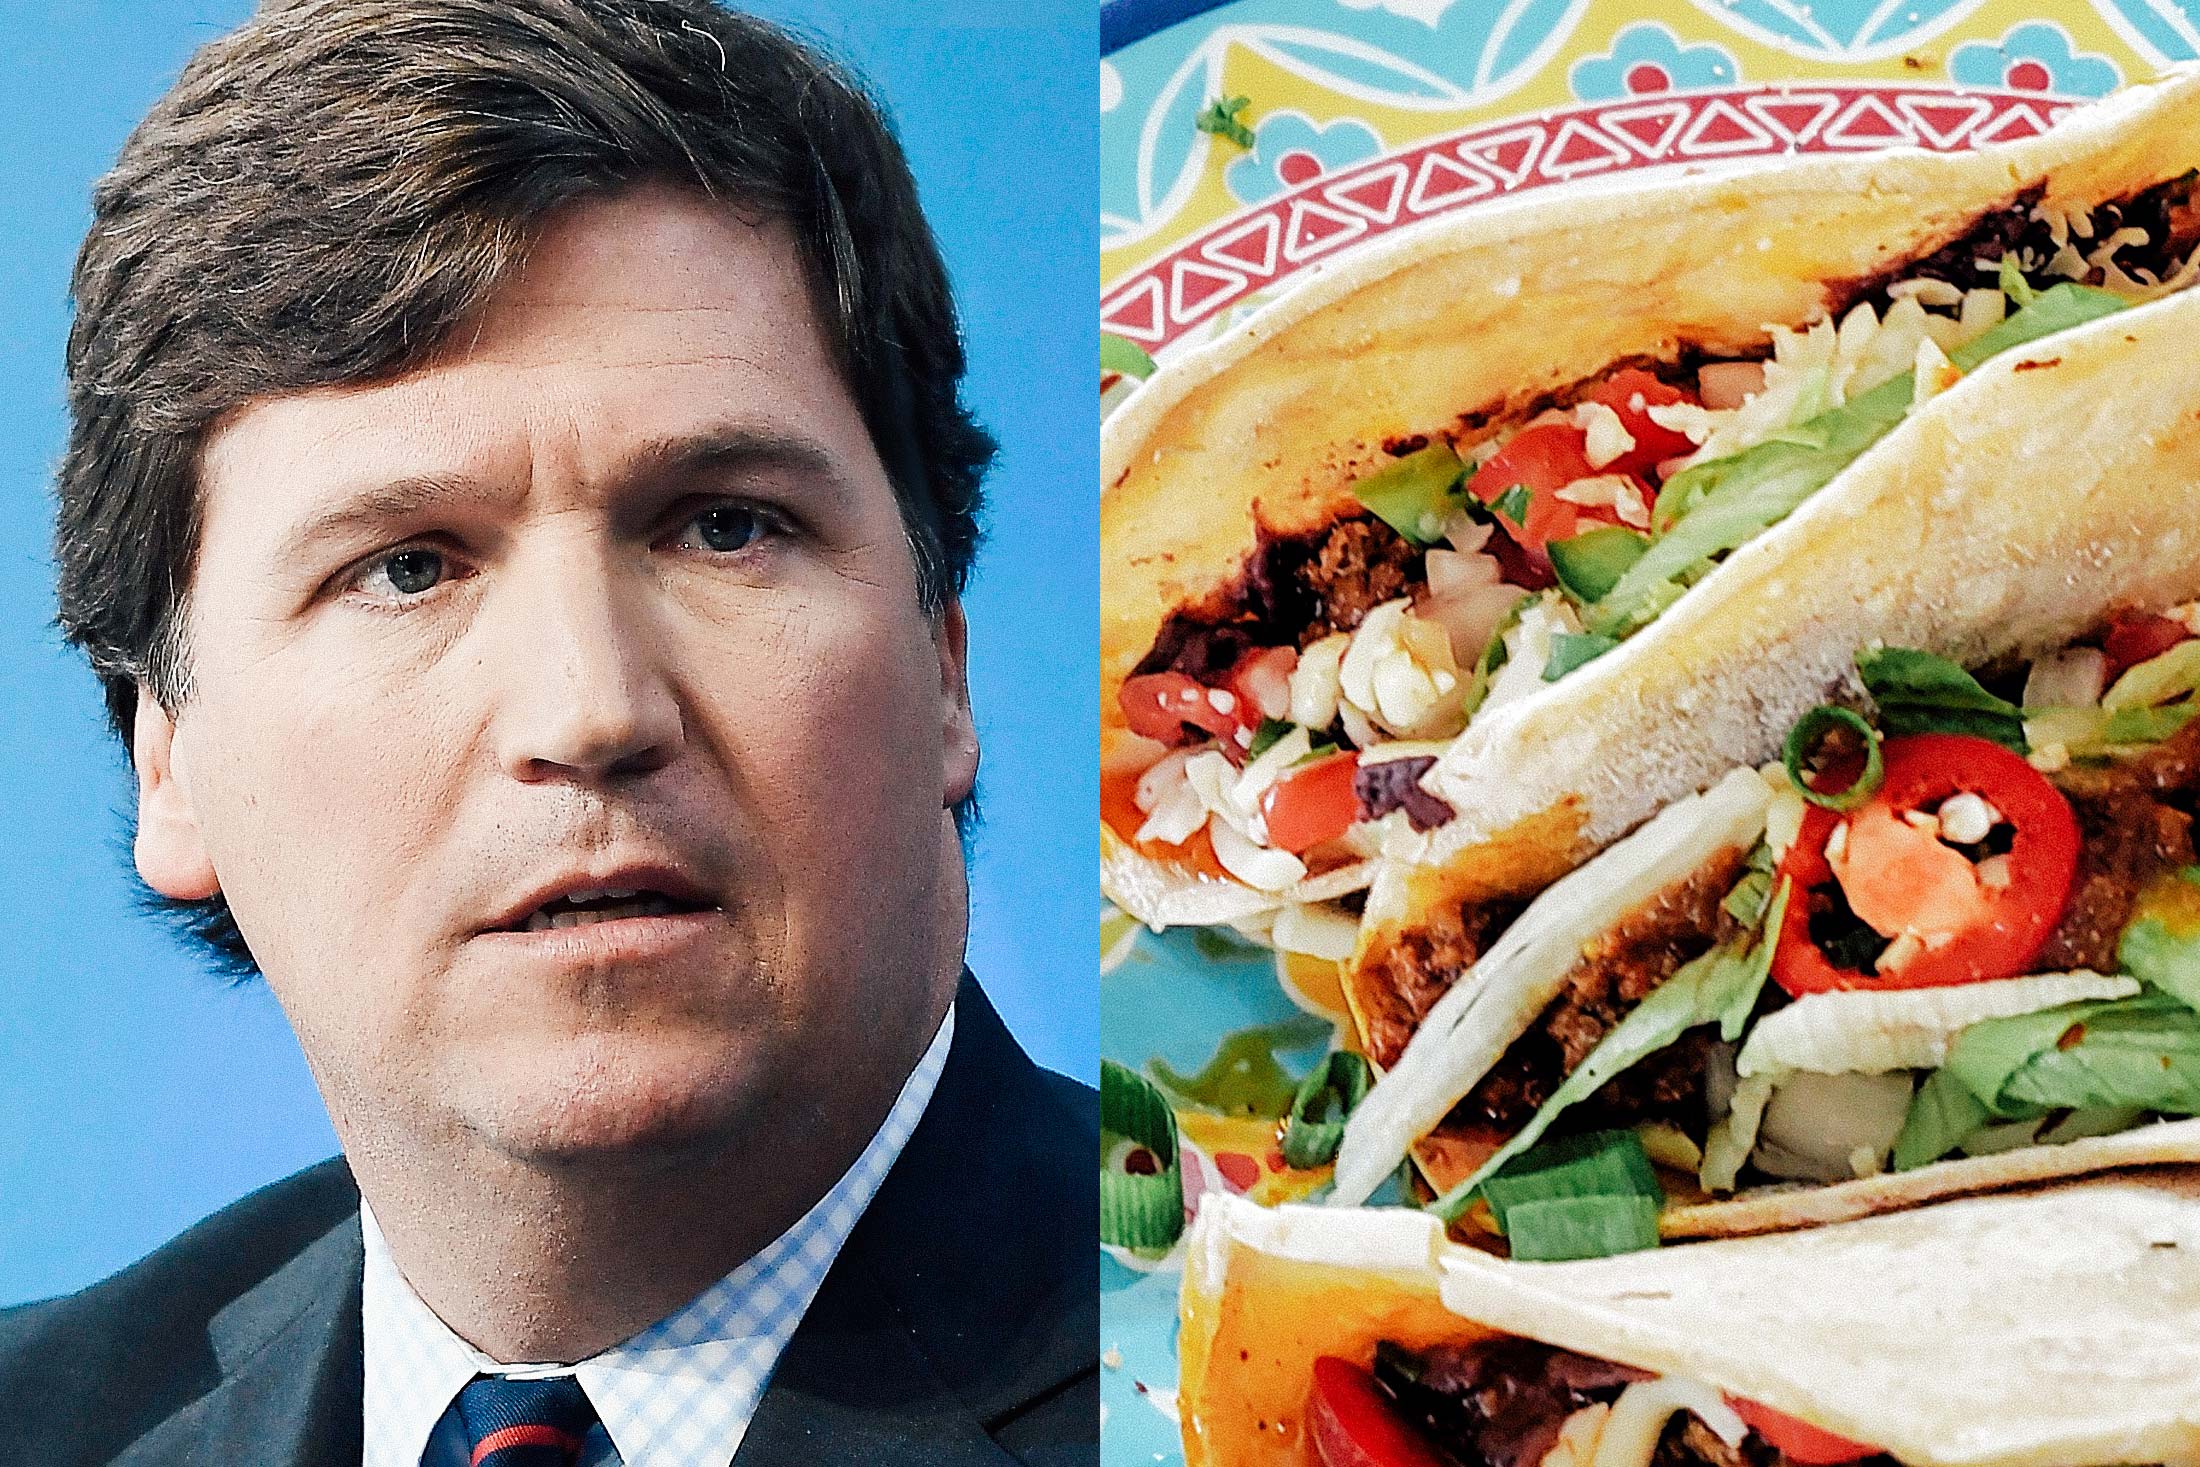 Side-by-side photos: On the left, we have Tucker Carlson. On the right, delicious tacos.